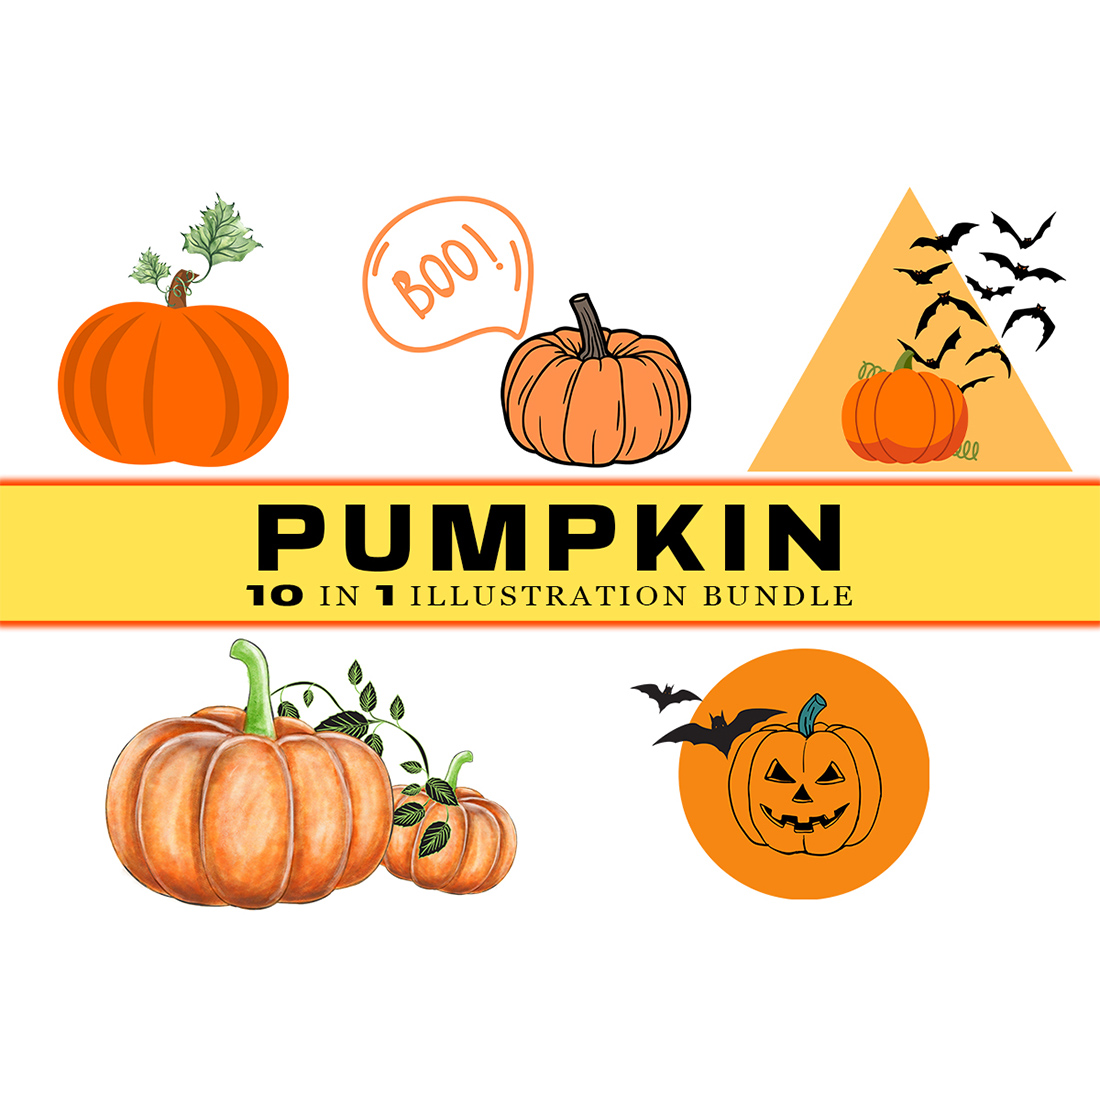 Collection of amazing pumpkin images